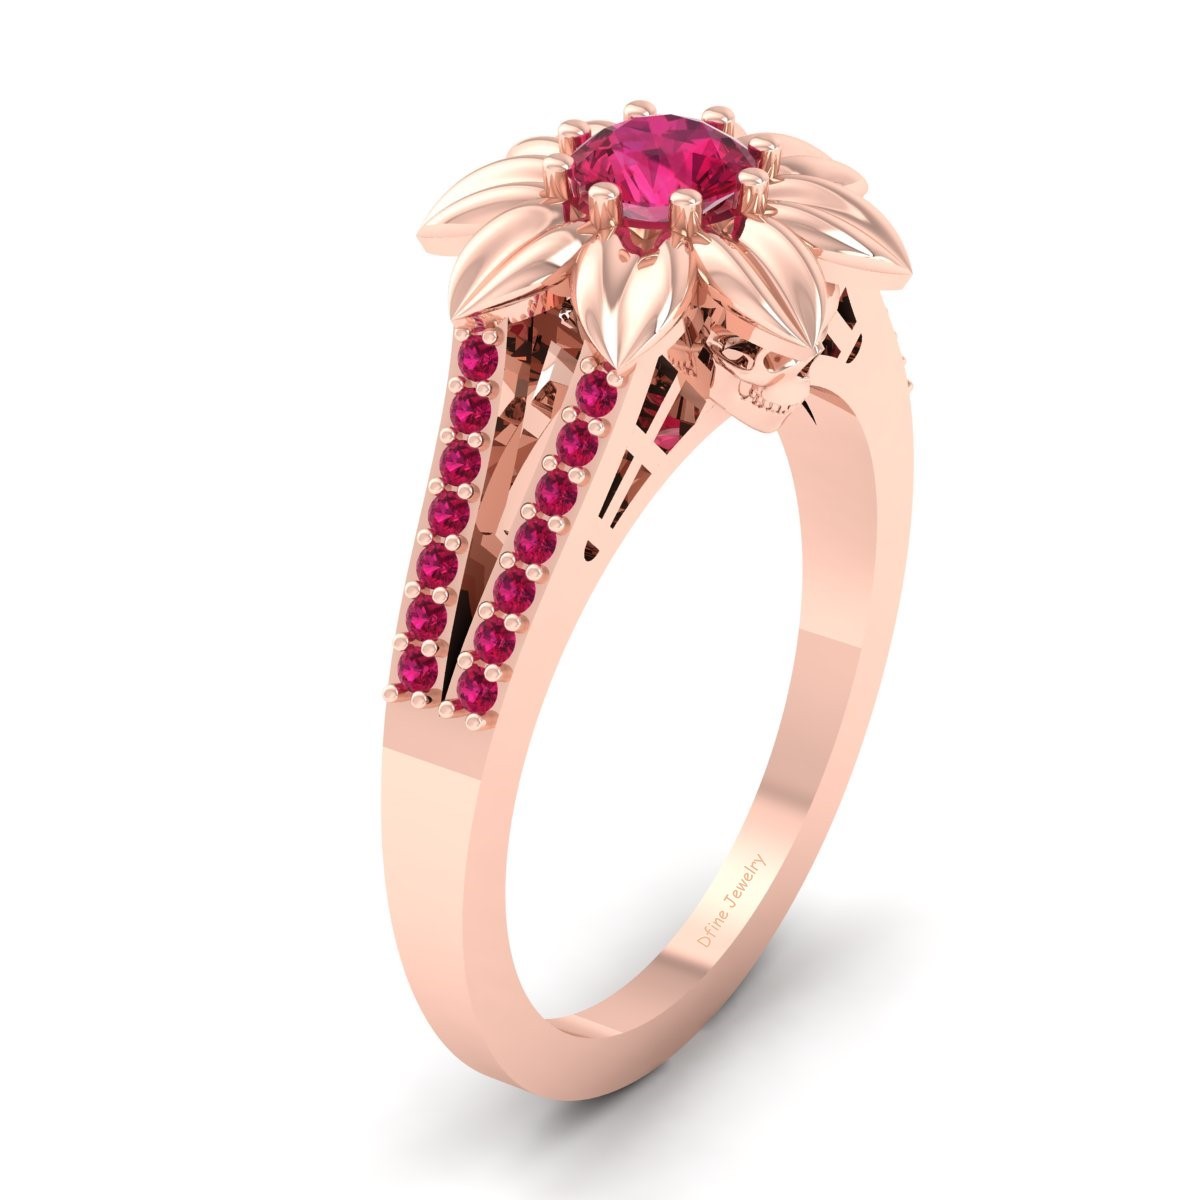 Primary image for Art Nouveau Floral Skull Engagement Ring Pink CZ Spooky Skull Wedding Ring Women